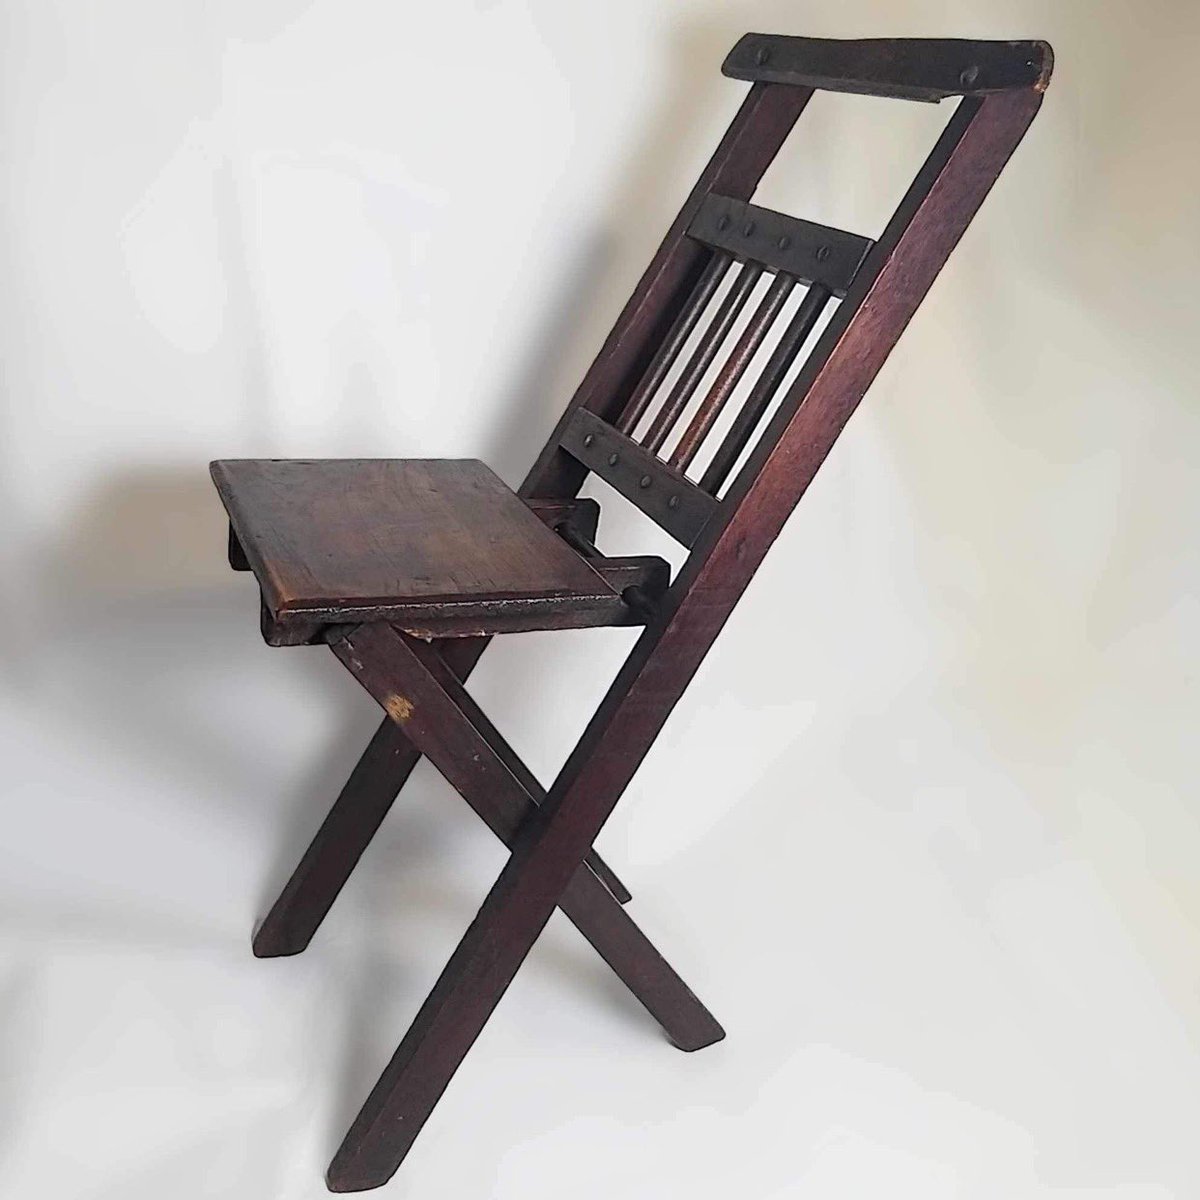 Antique c. 1910 Wooden Folding Fishing Chair. Fabulous colour, great patina and wear all commensurate with age.

Available from Lena’s Vintage Corner in The Malthouse Collective on Monday 6th November ‘23. Alternatively visit our Etsy Shop.

#etsyukseller #etsyukshop